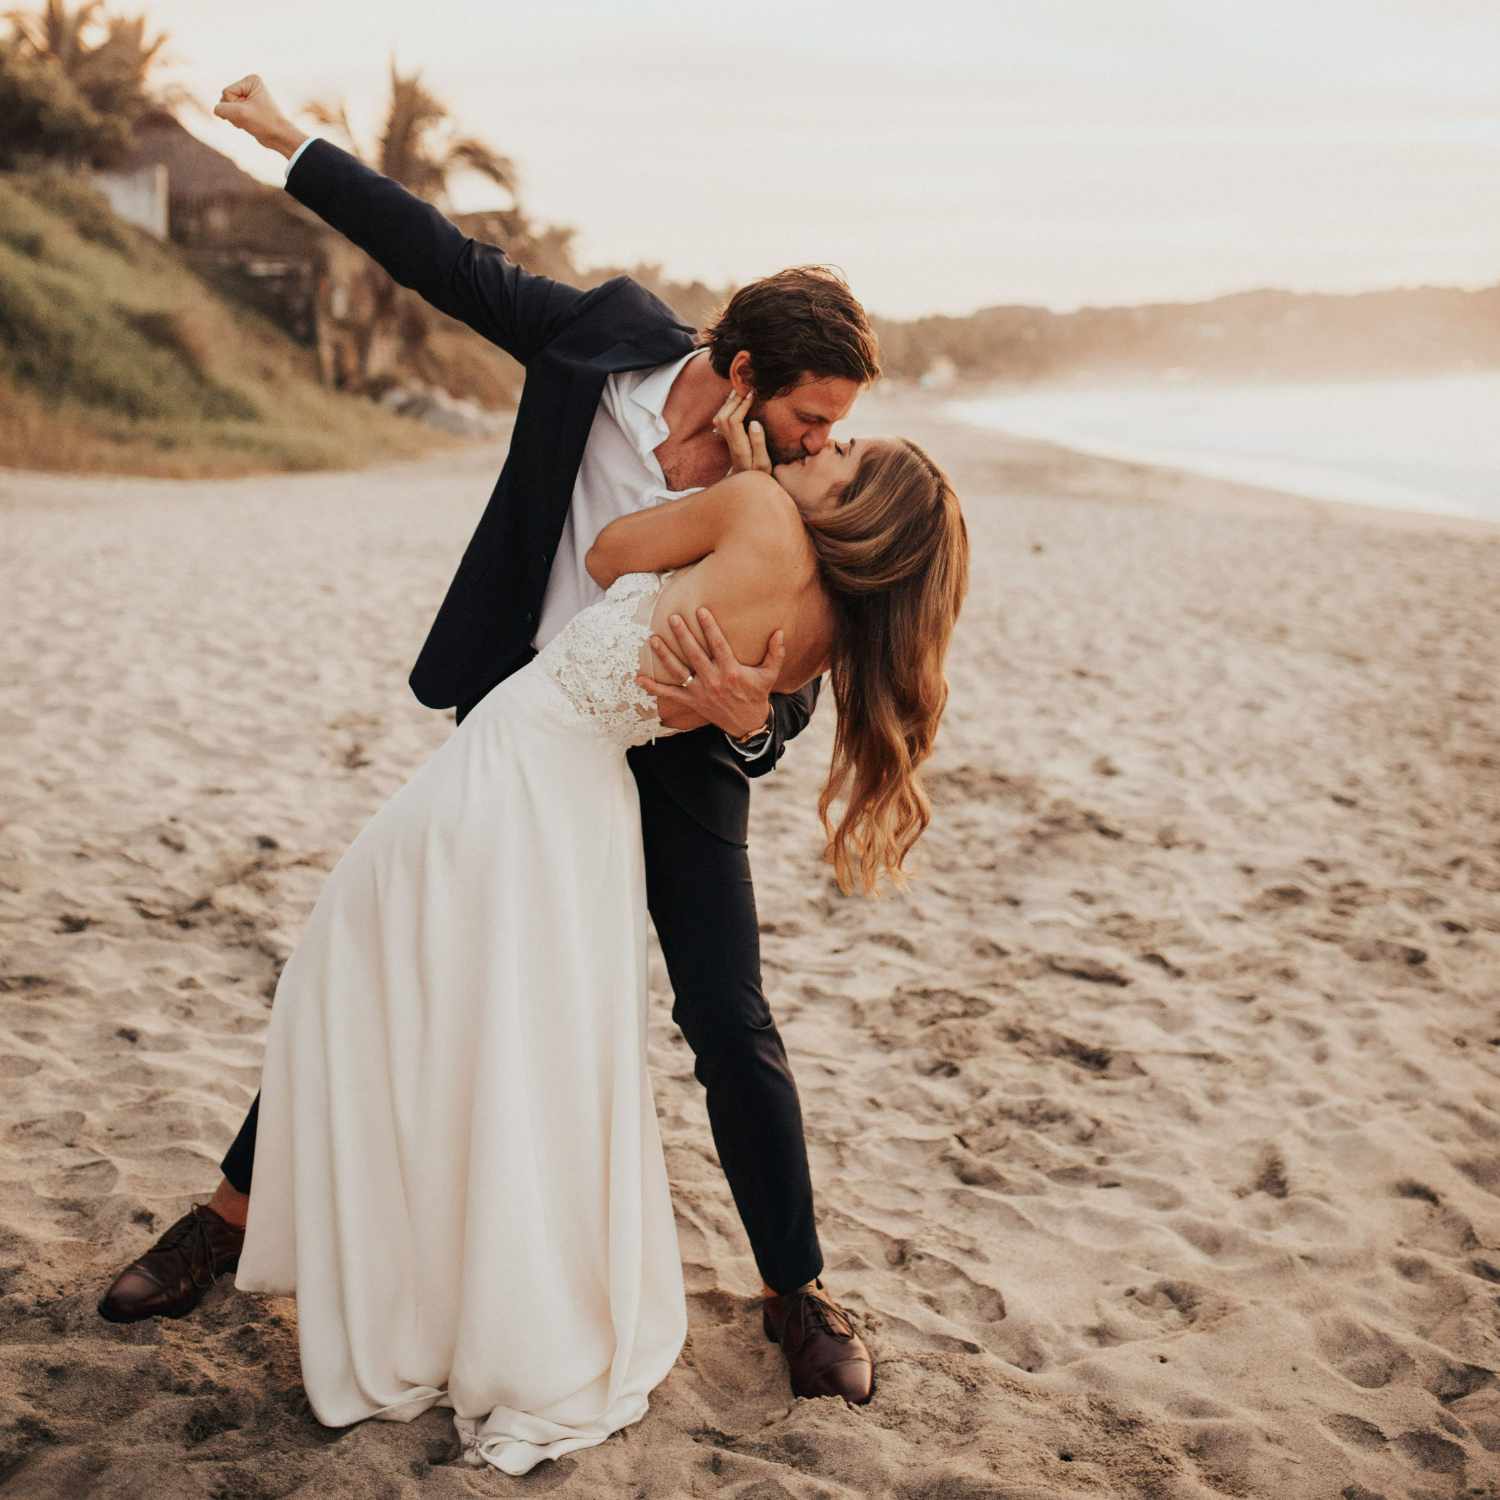 Dreamy Beach Wedding Ideas On A Budget - Making Your Coastal Celebration Affordable And Beautiful